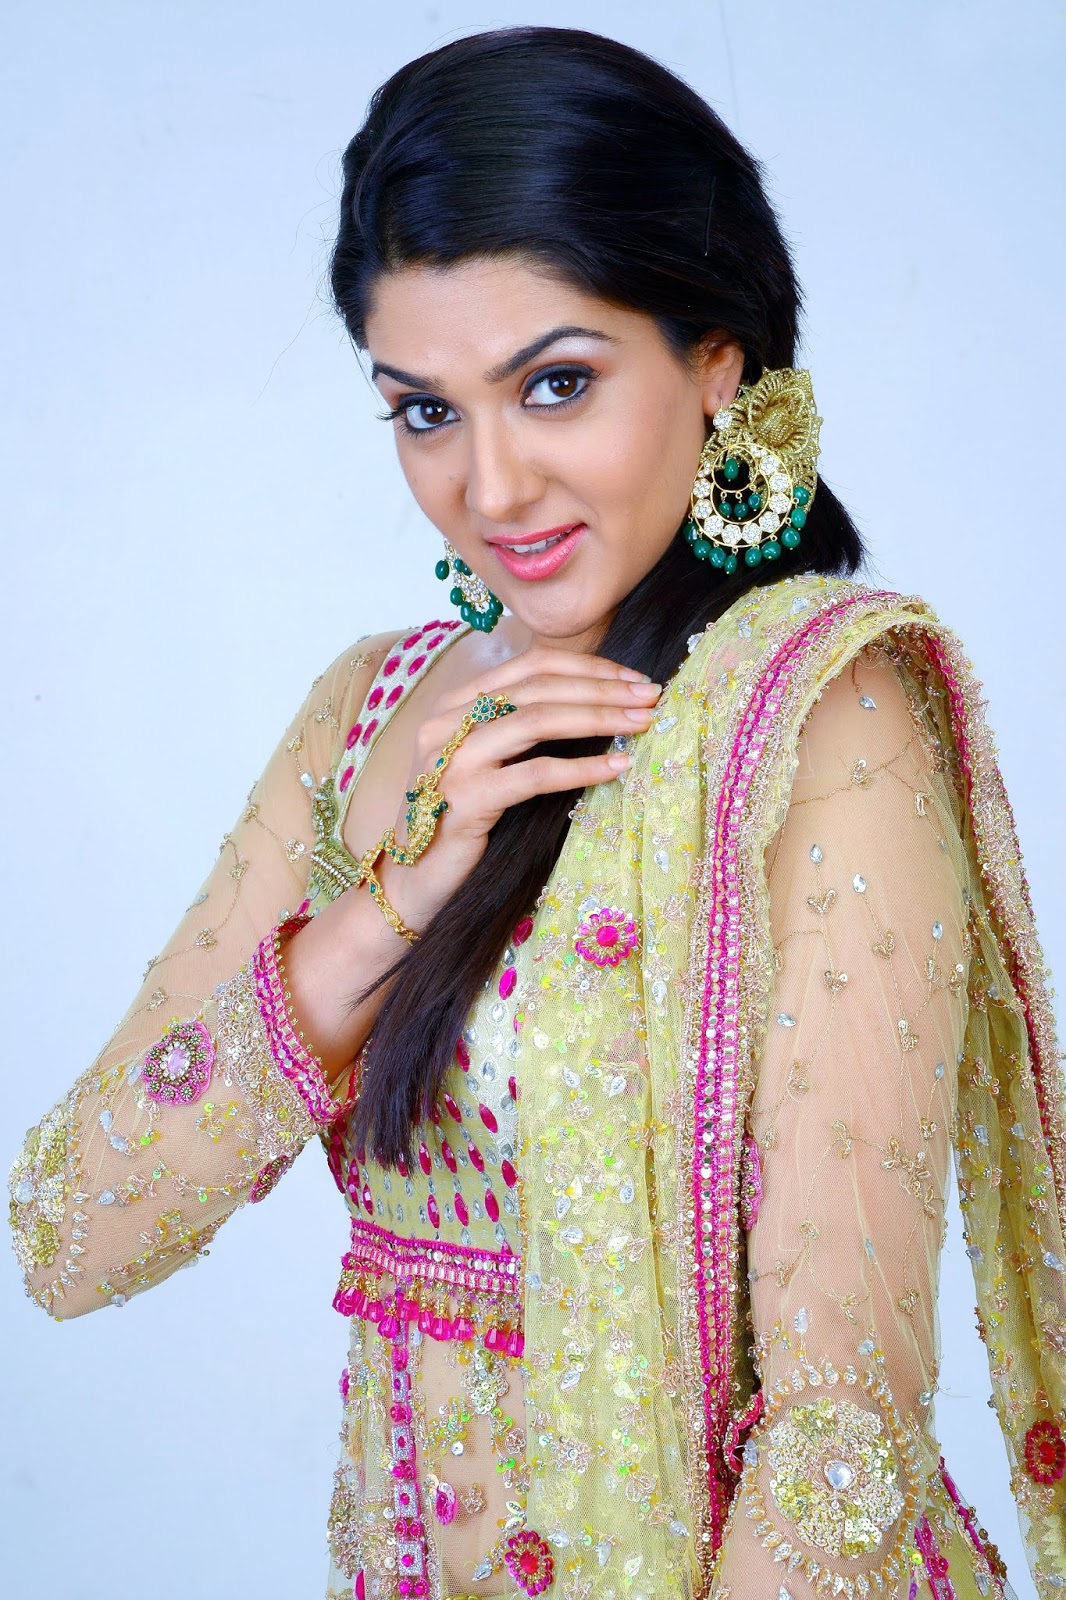 Beauty Galore Hd Sakshi Chaudhary Immensely Beautiful Photos